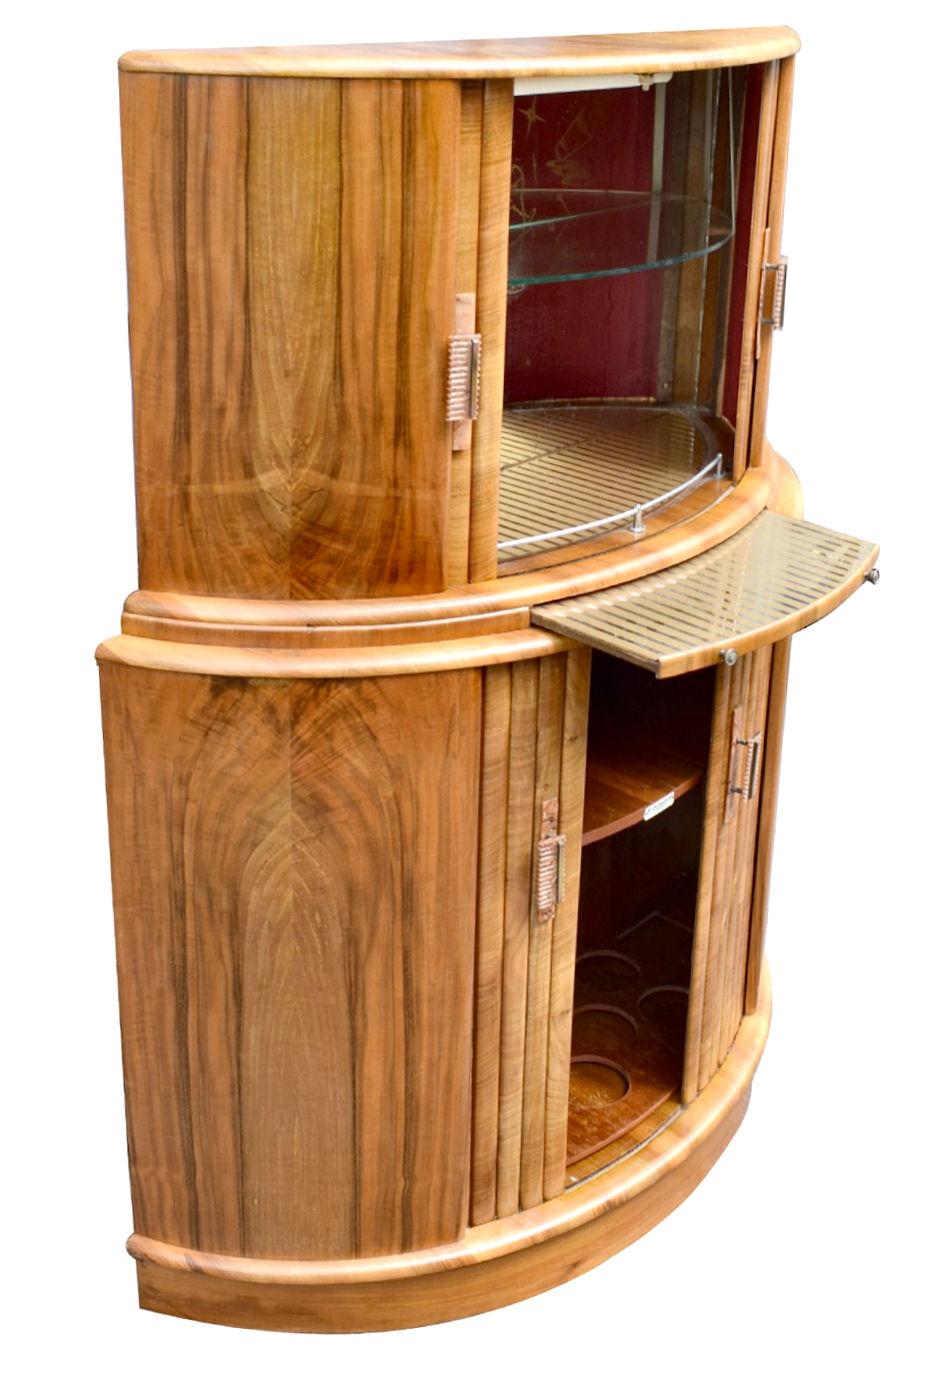 Gorgeous and original 1930s Art Deco cocktail cabinet in figured walnut. This cabinet really is stunning, featuring a storage area for bottles at the bottom and glasses etc. at the top. The top part of the cocktail cabinet has an all mirrored